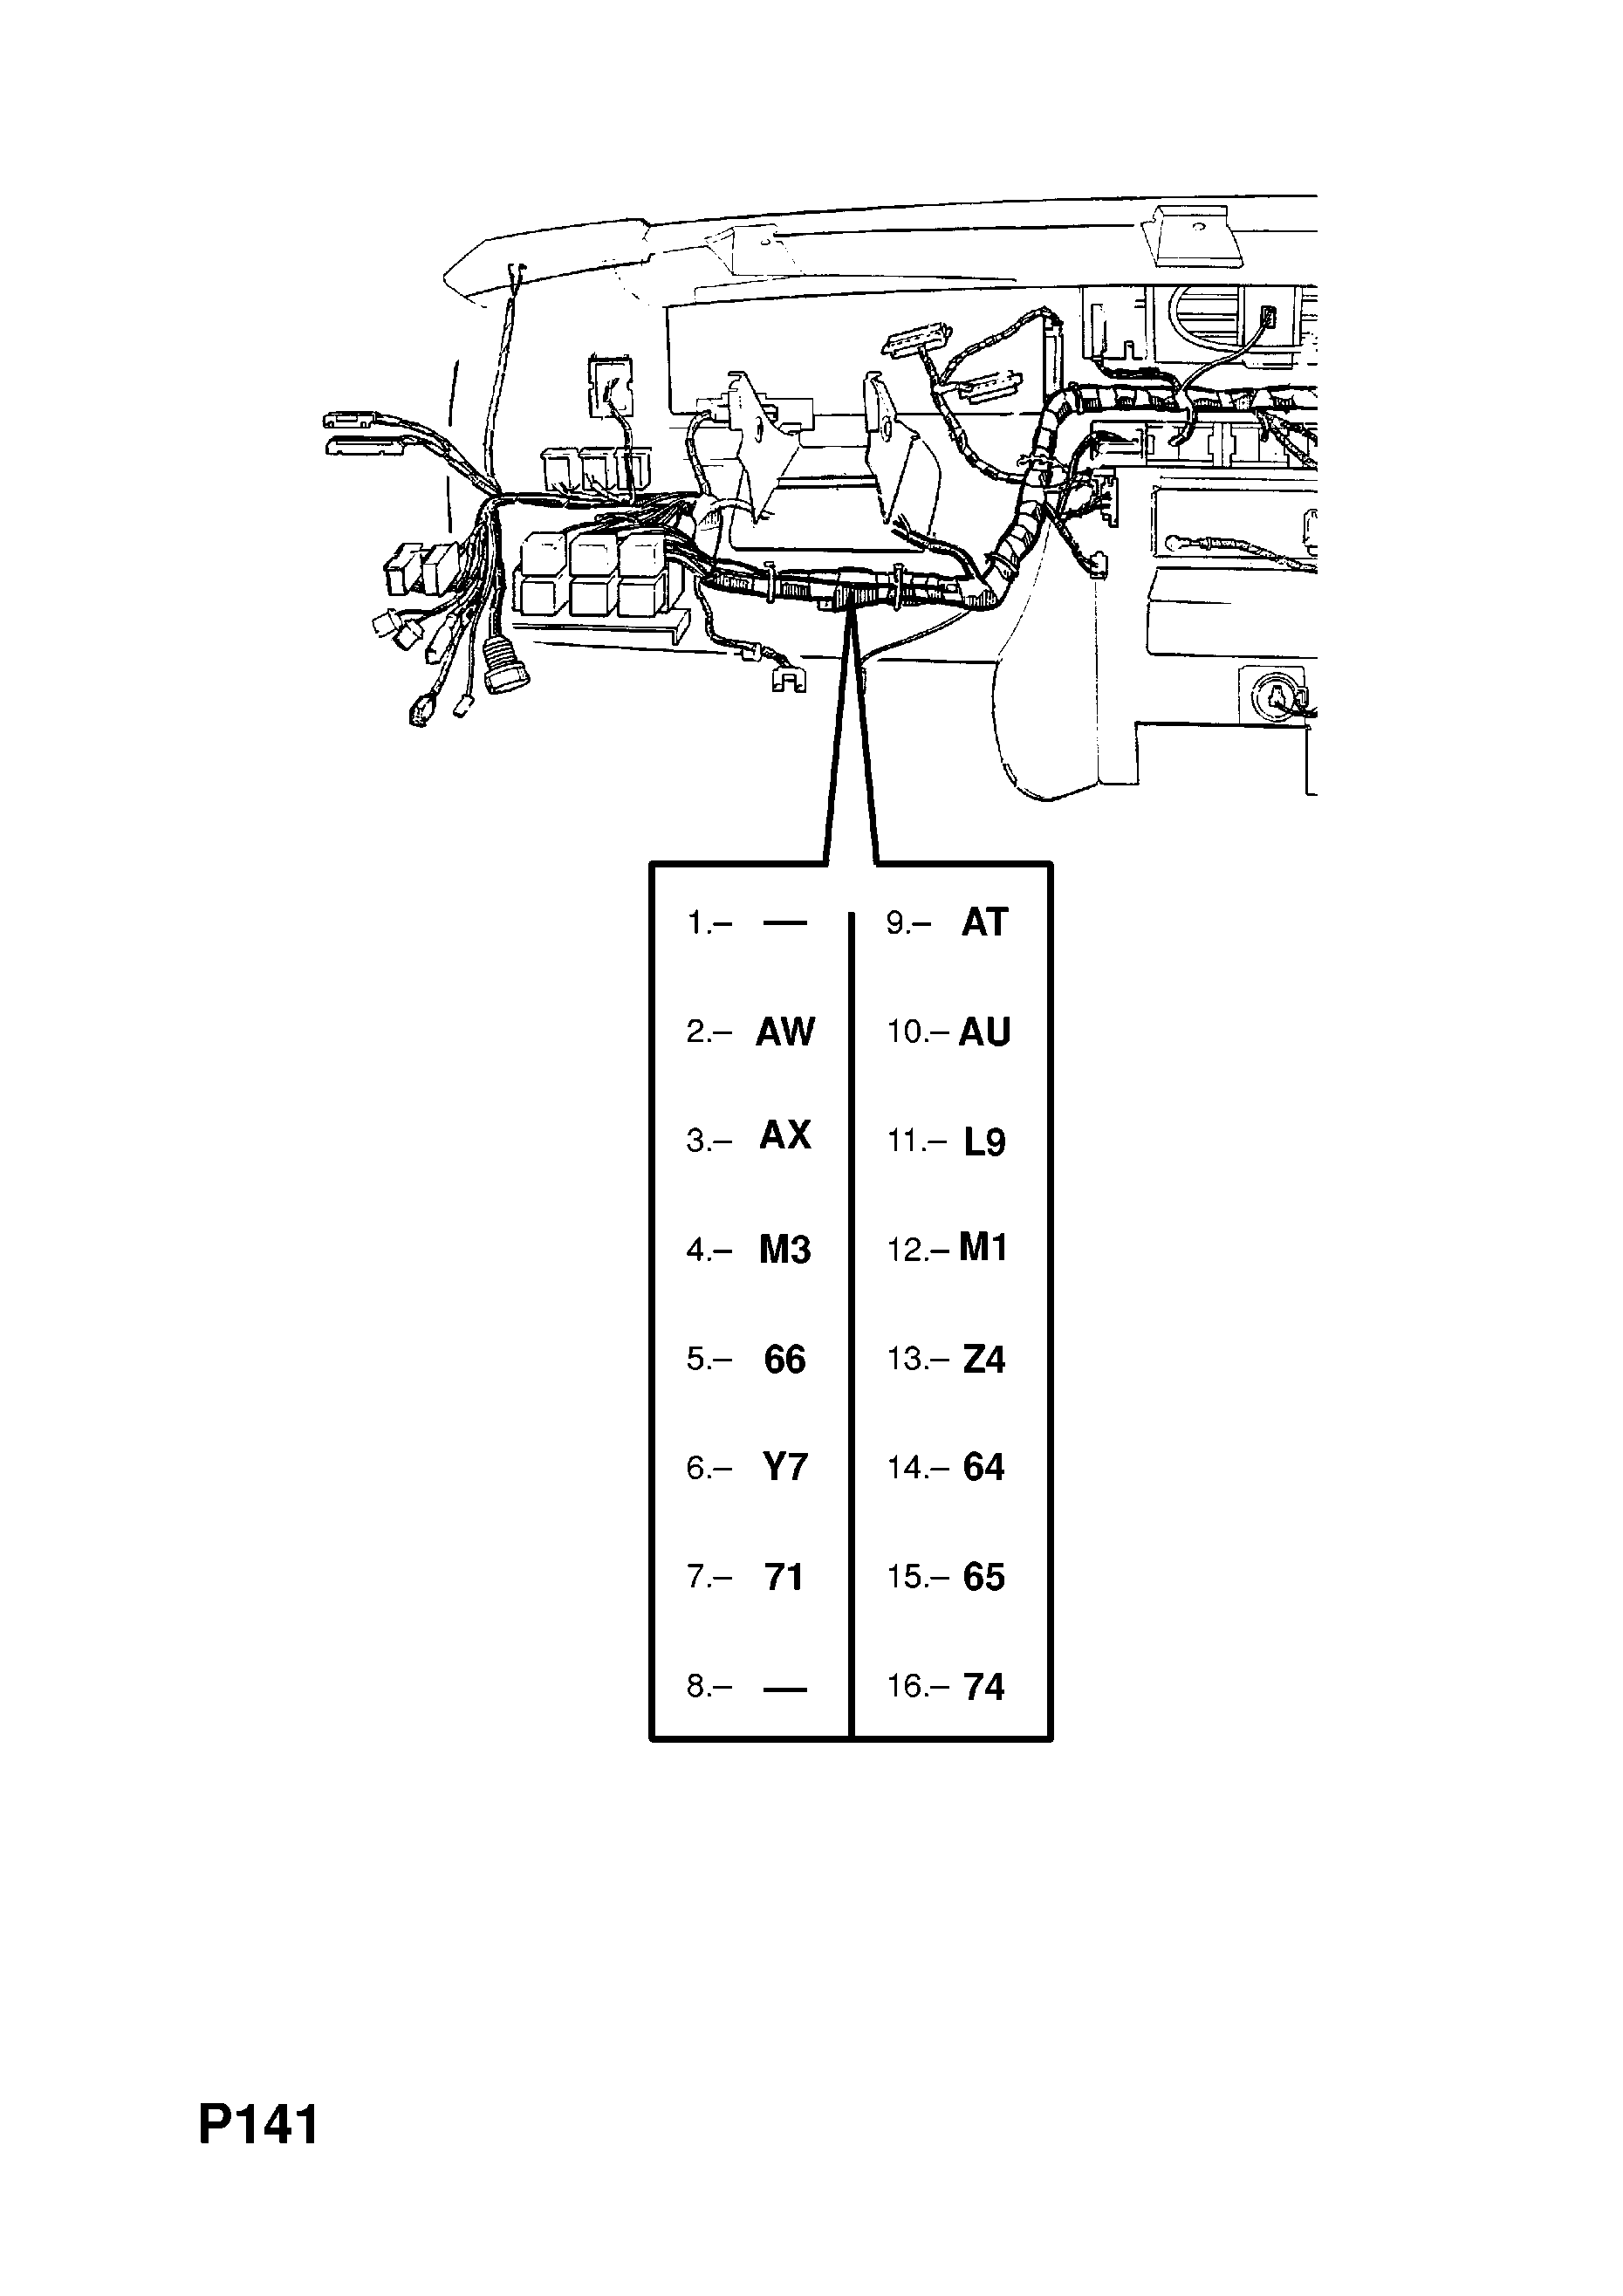 INSTRUMENT PANEL WIRING HARNESS (CONTD.) <small><i>[H1000001-L1999999 FOR AUTOMATIC TRANSMISSION AND LCD INSTRUMENTS EXCEPT AIR CONDITIONING (CONTD.)]</i></small>